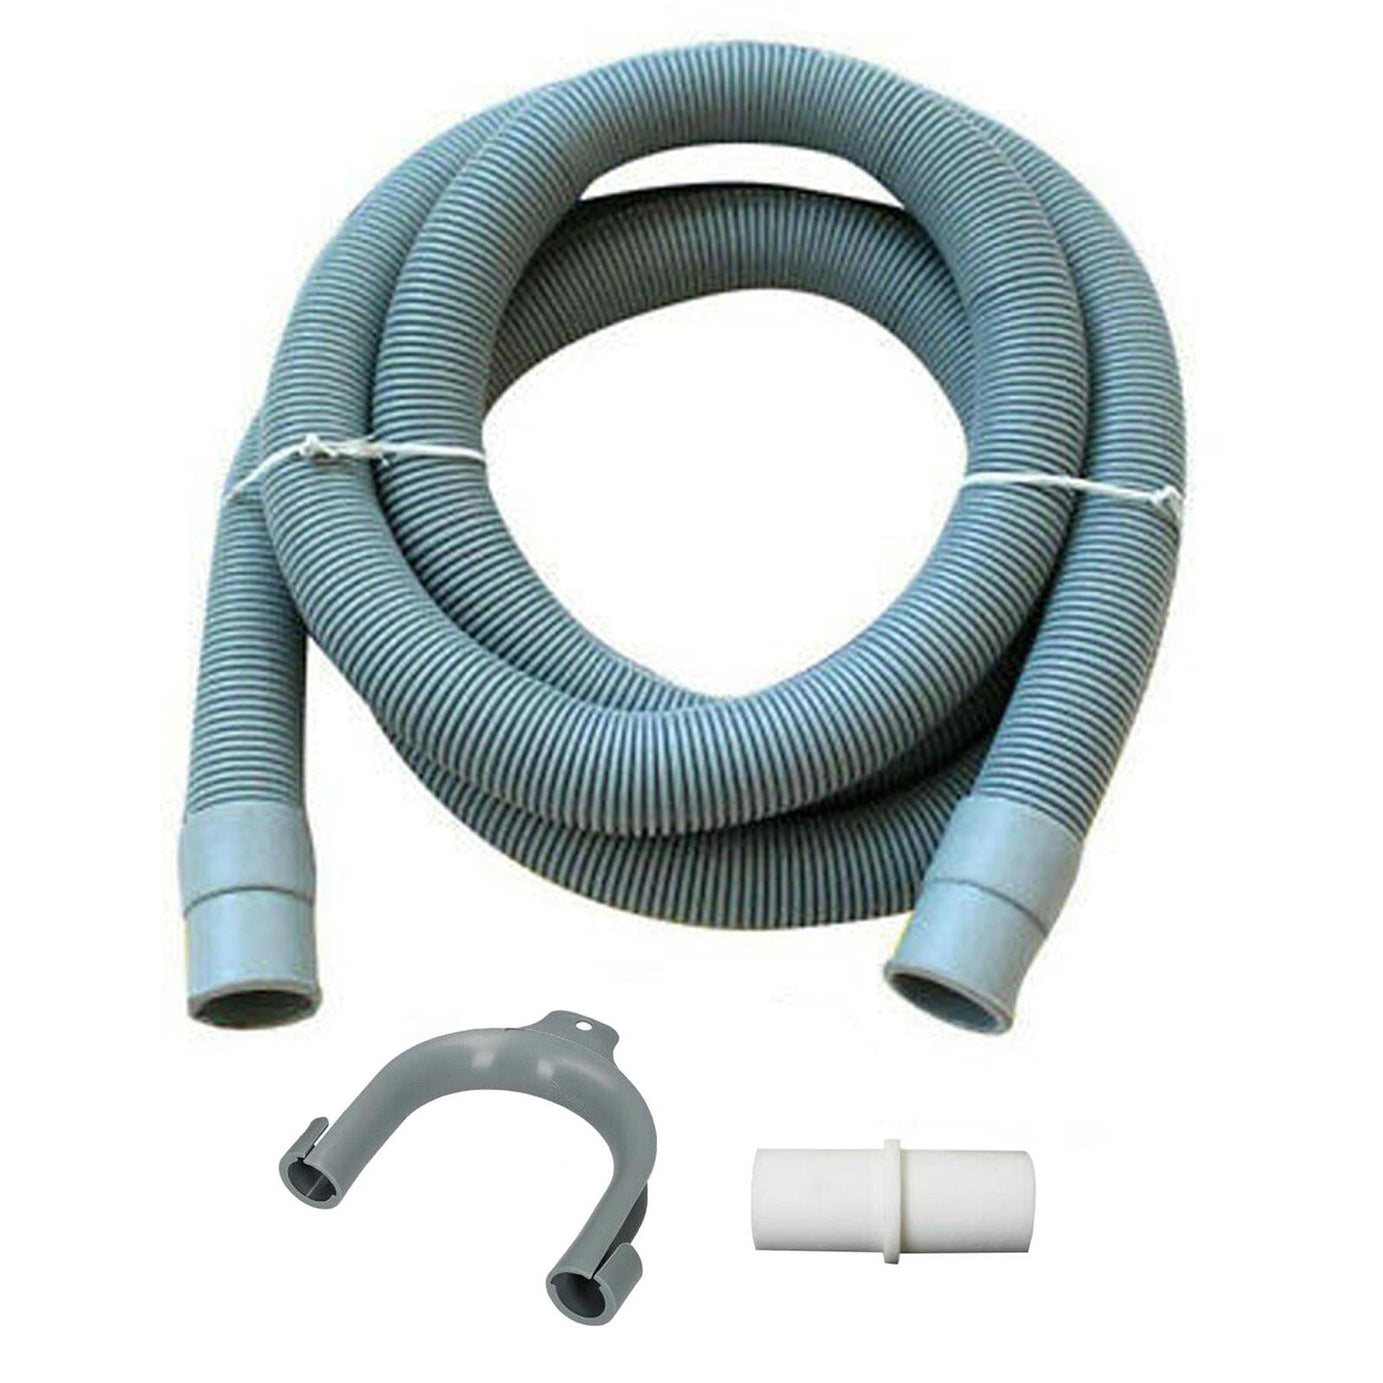 3M Drain Waste Hose Extension Pipe